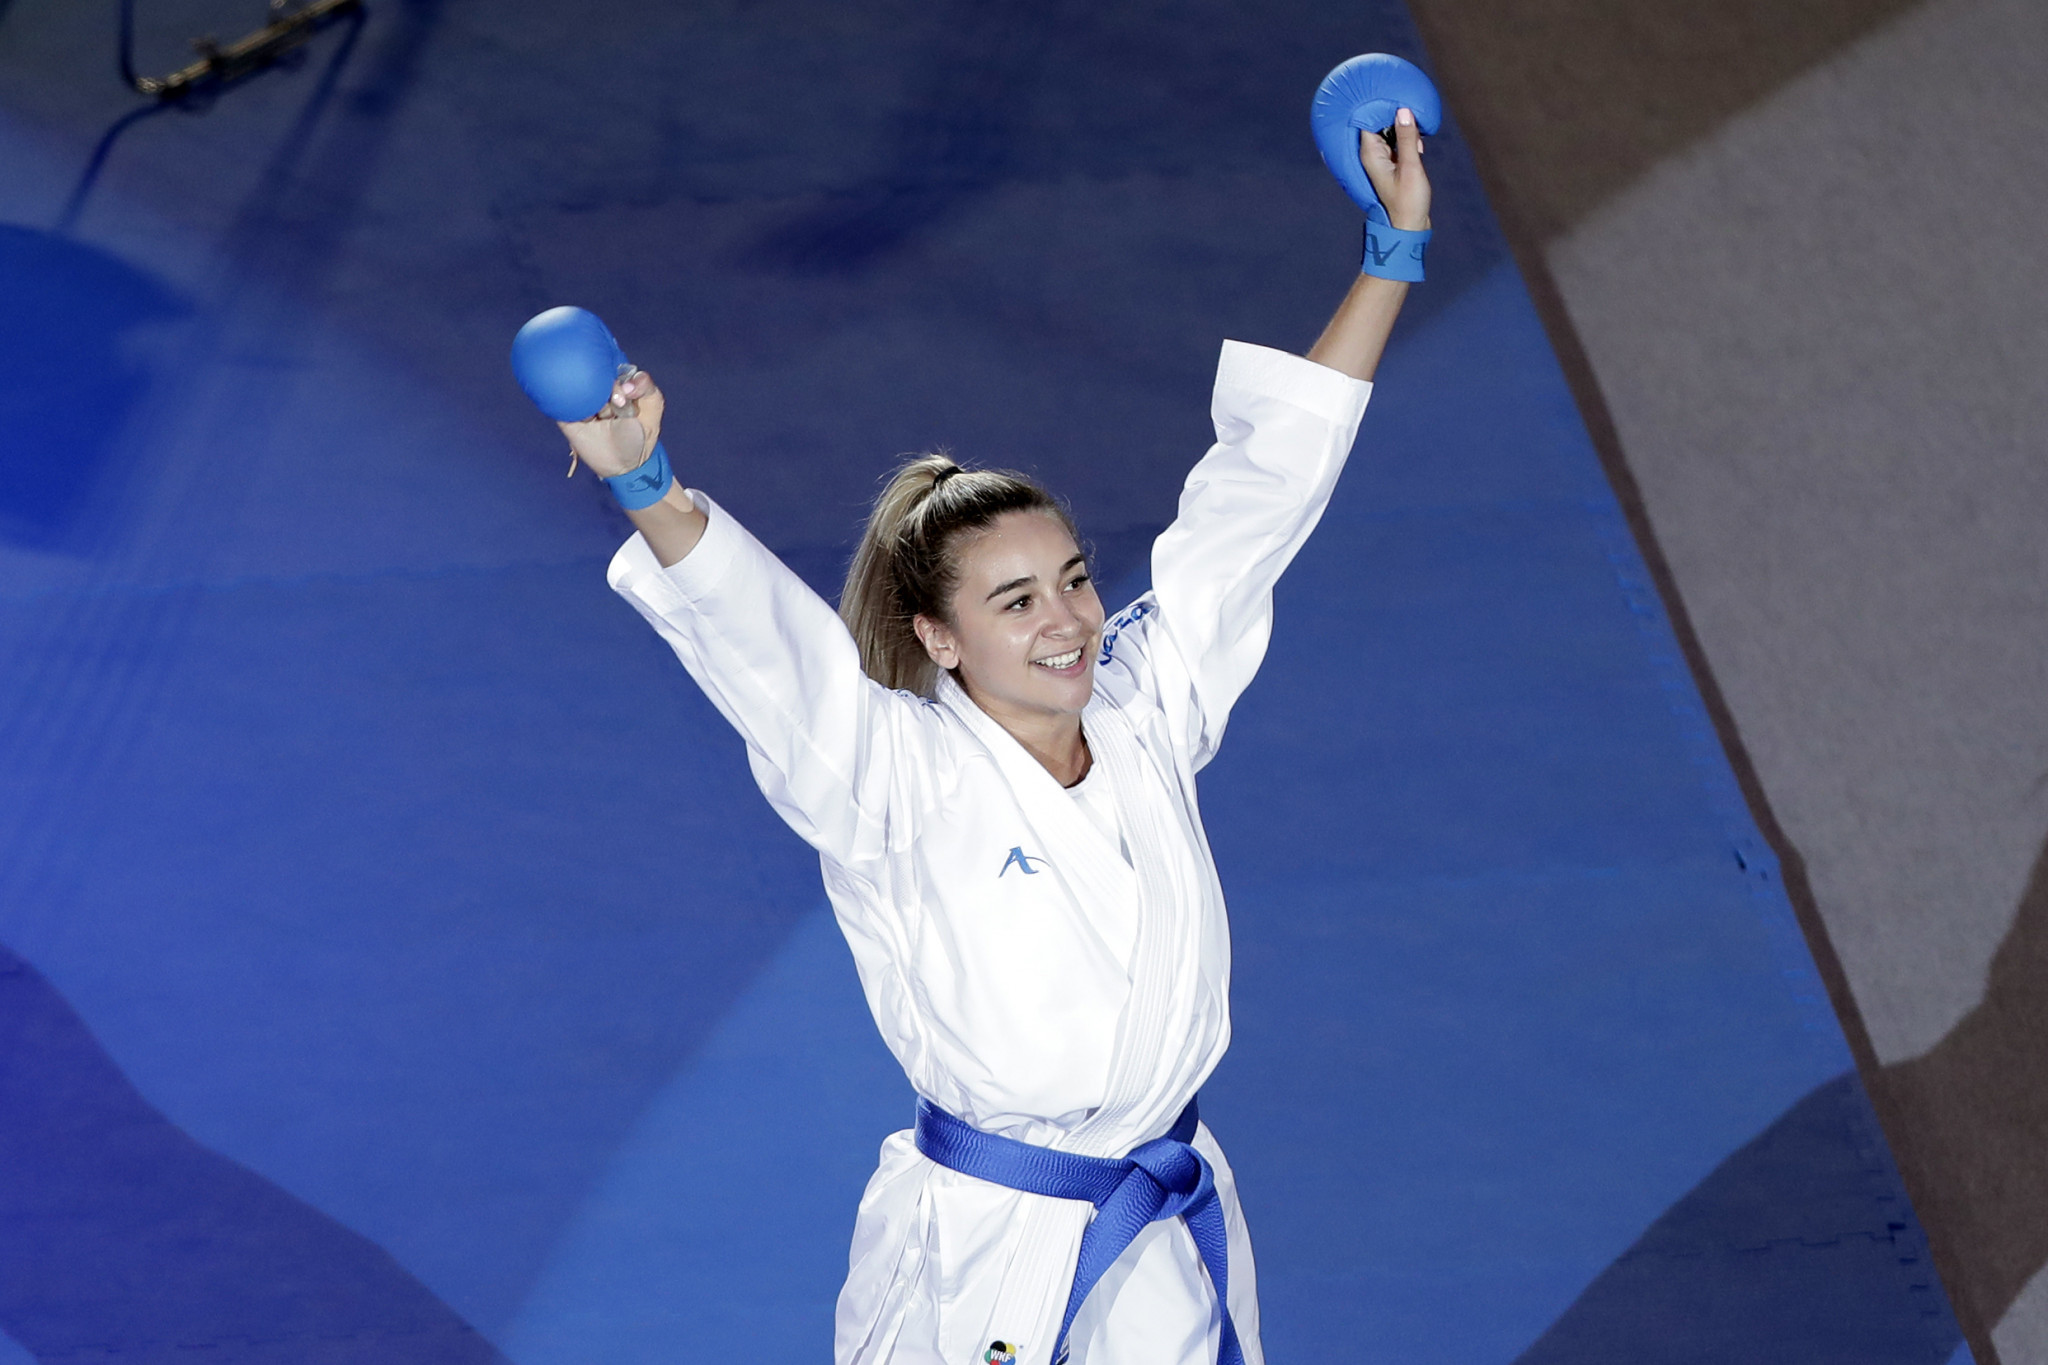 Anzhelika Terliuga was named the women's under-55kg grand winner ©Getty Images